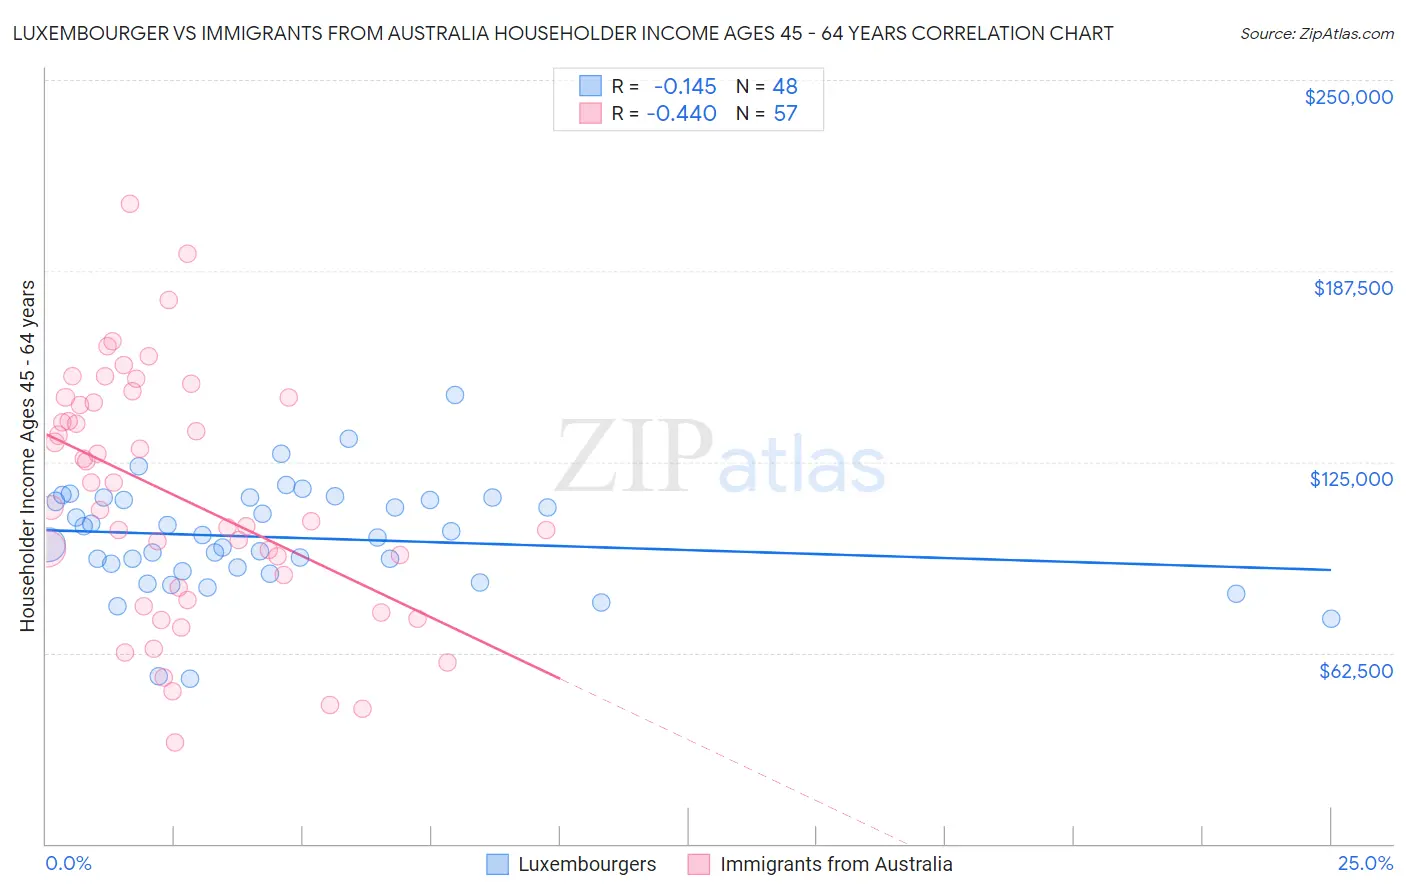 Luxembourger vs Immigrants from Australia Householder Income Ages 45 - 64 years